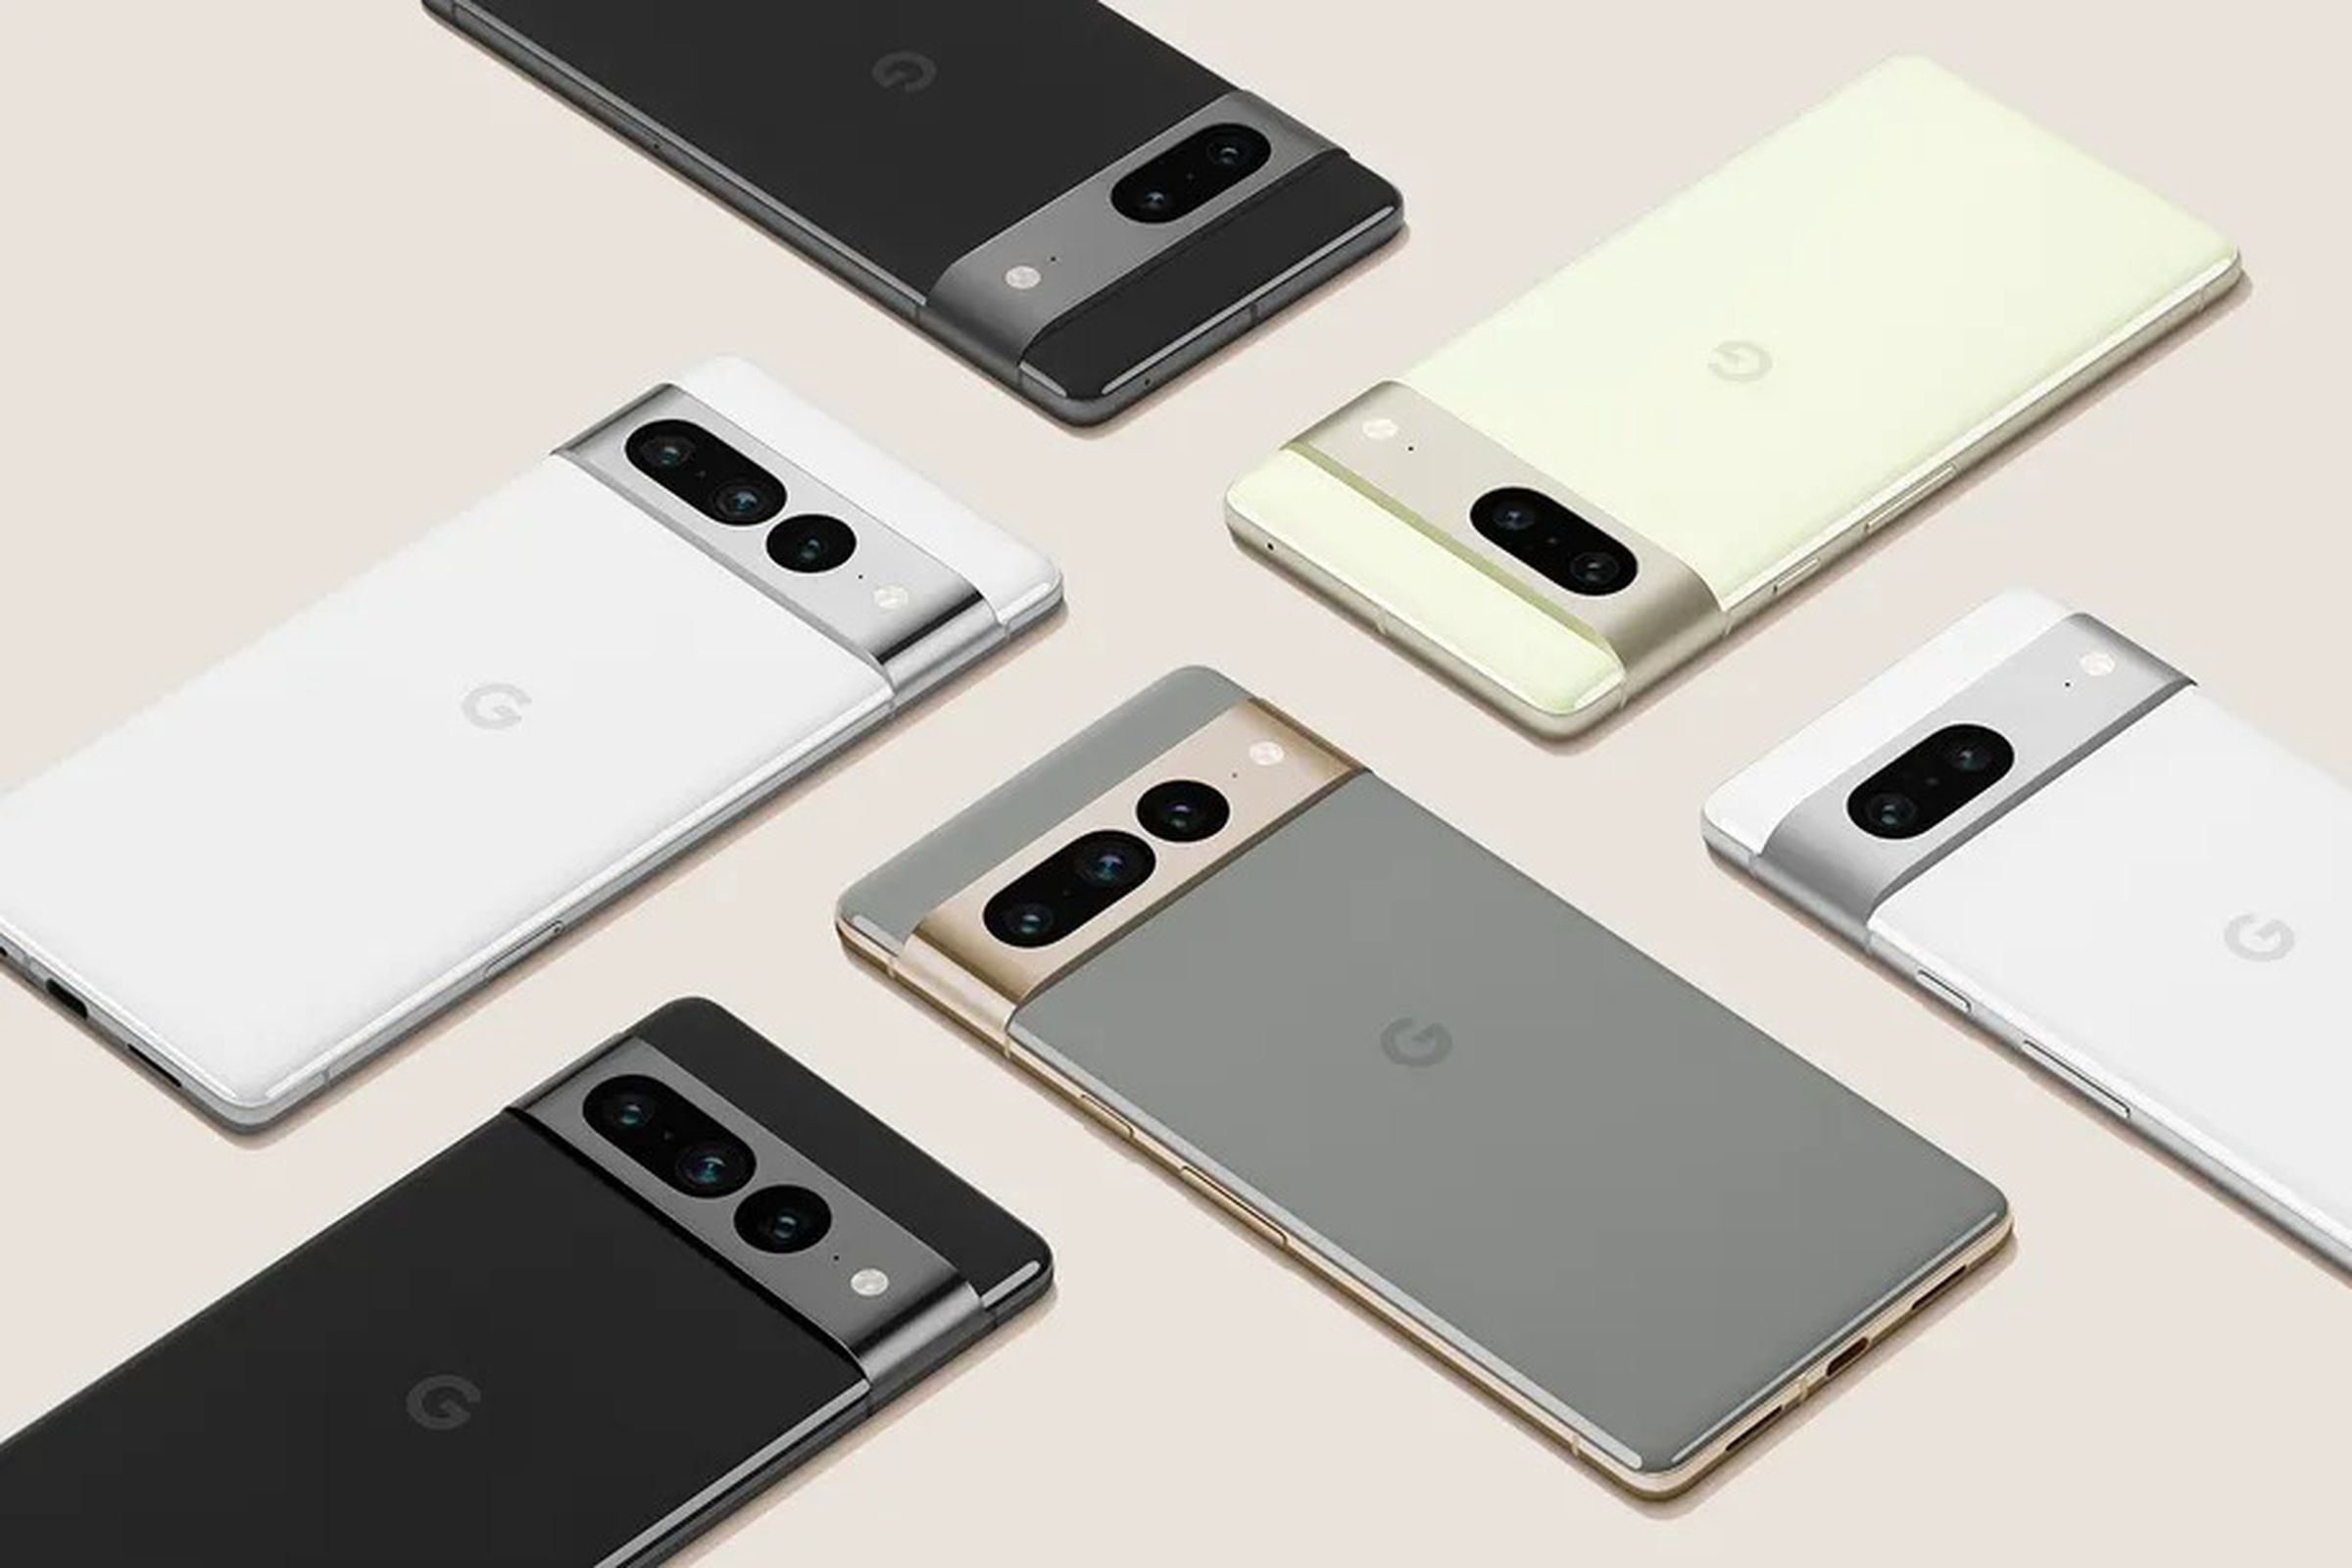 A graphic showing Google’s upcoming Pixel 7 smartphones